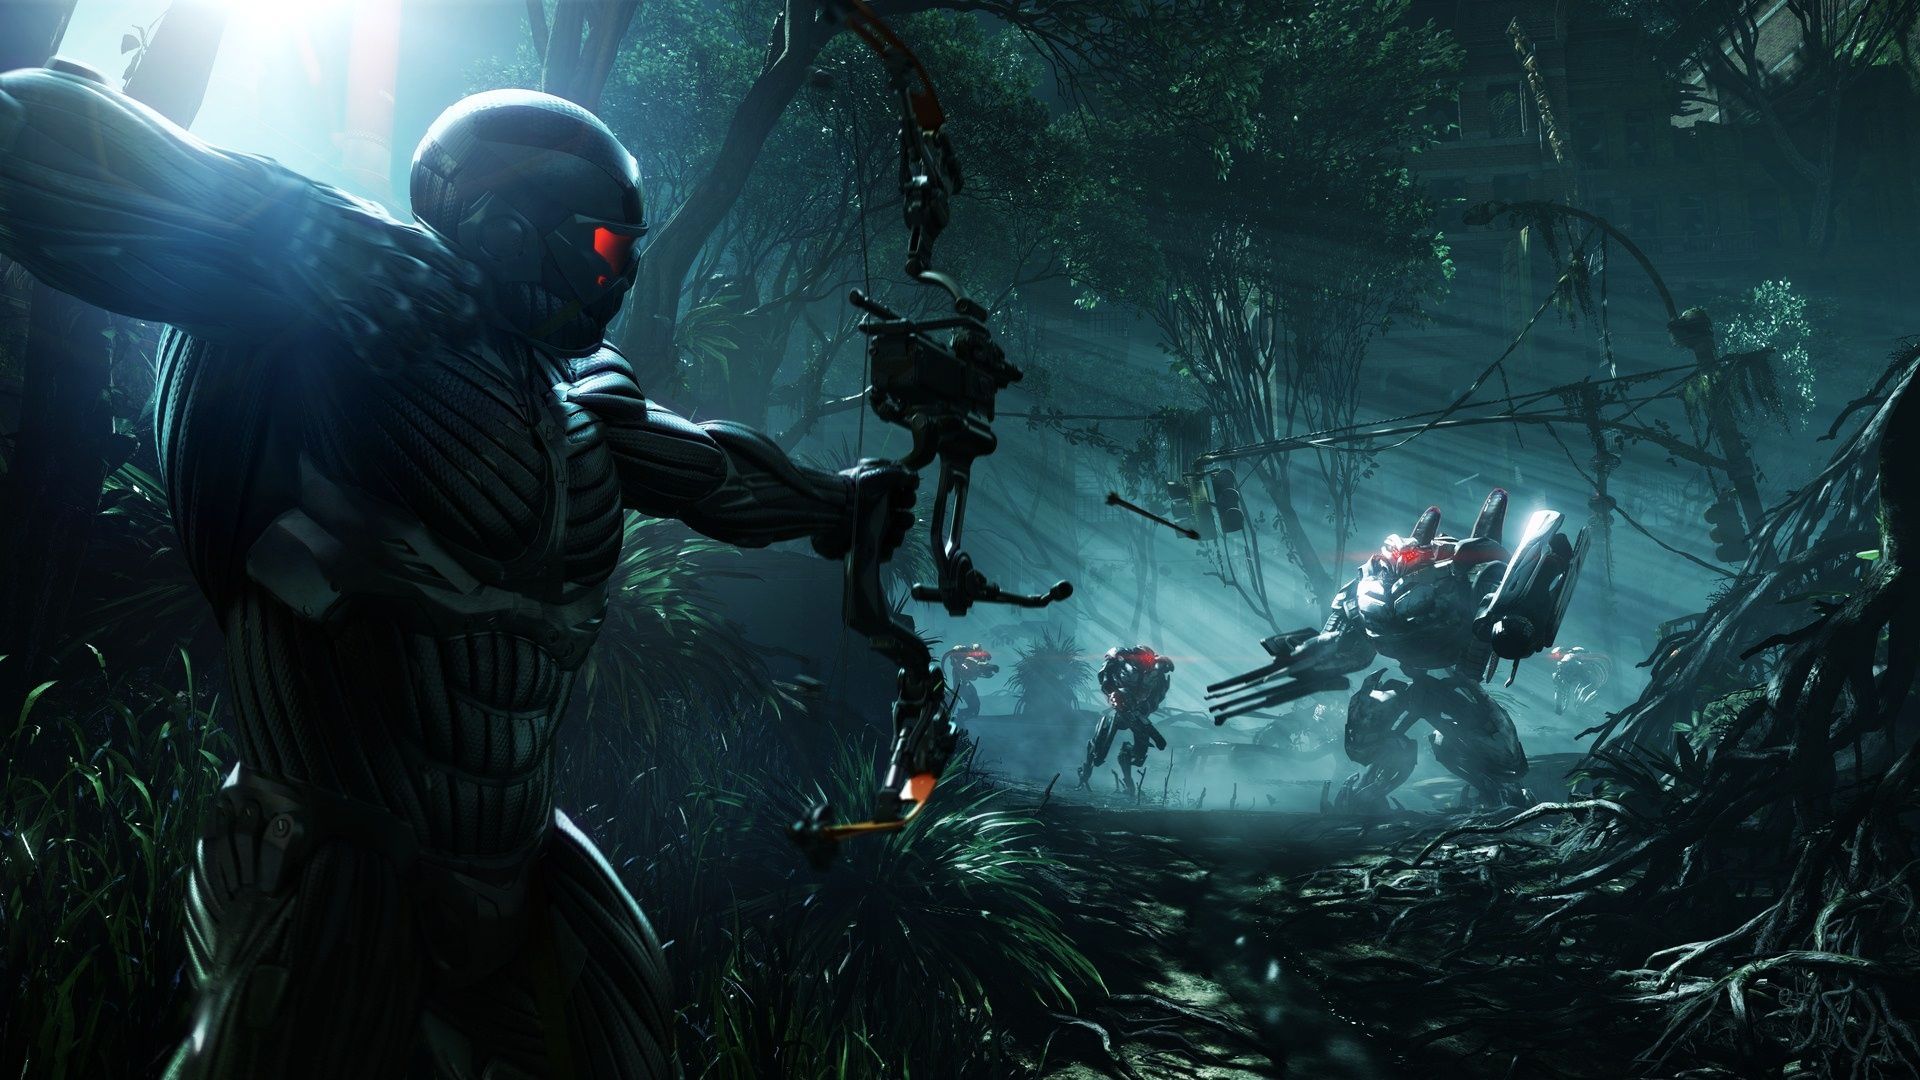 Crysis 3 Wallpapers | HD Wallpapers